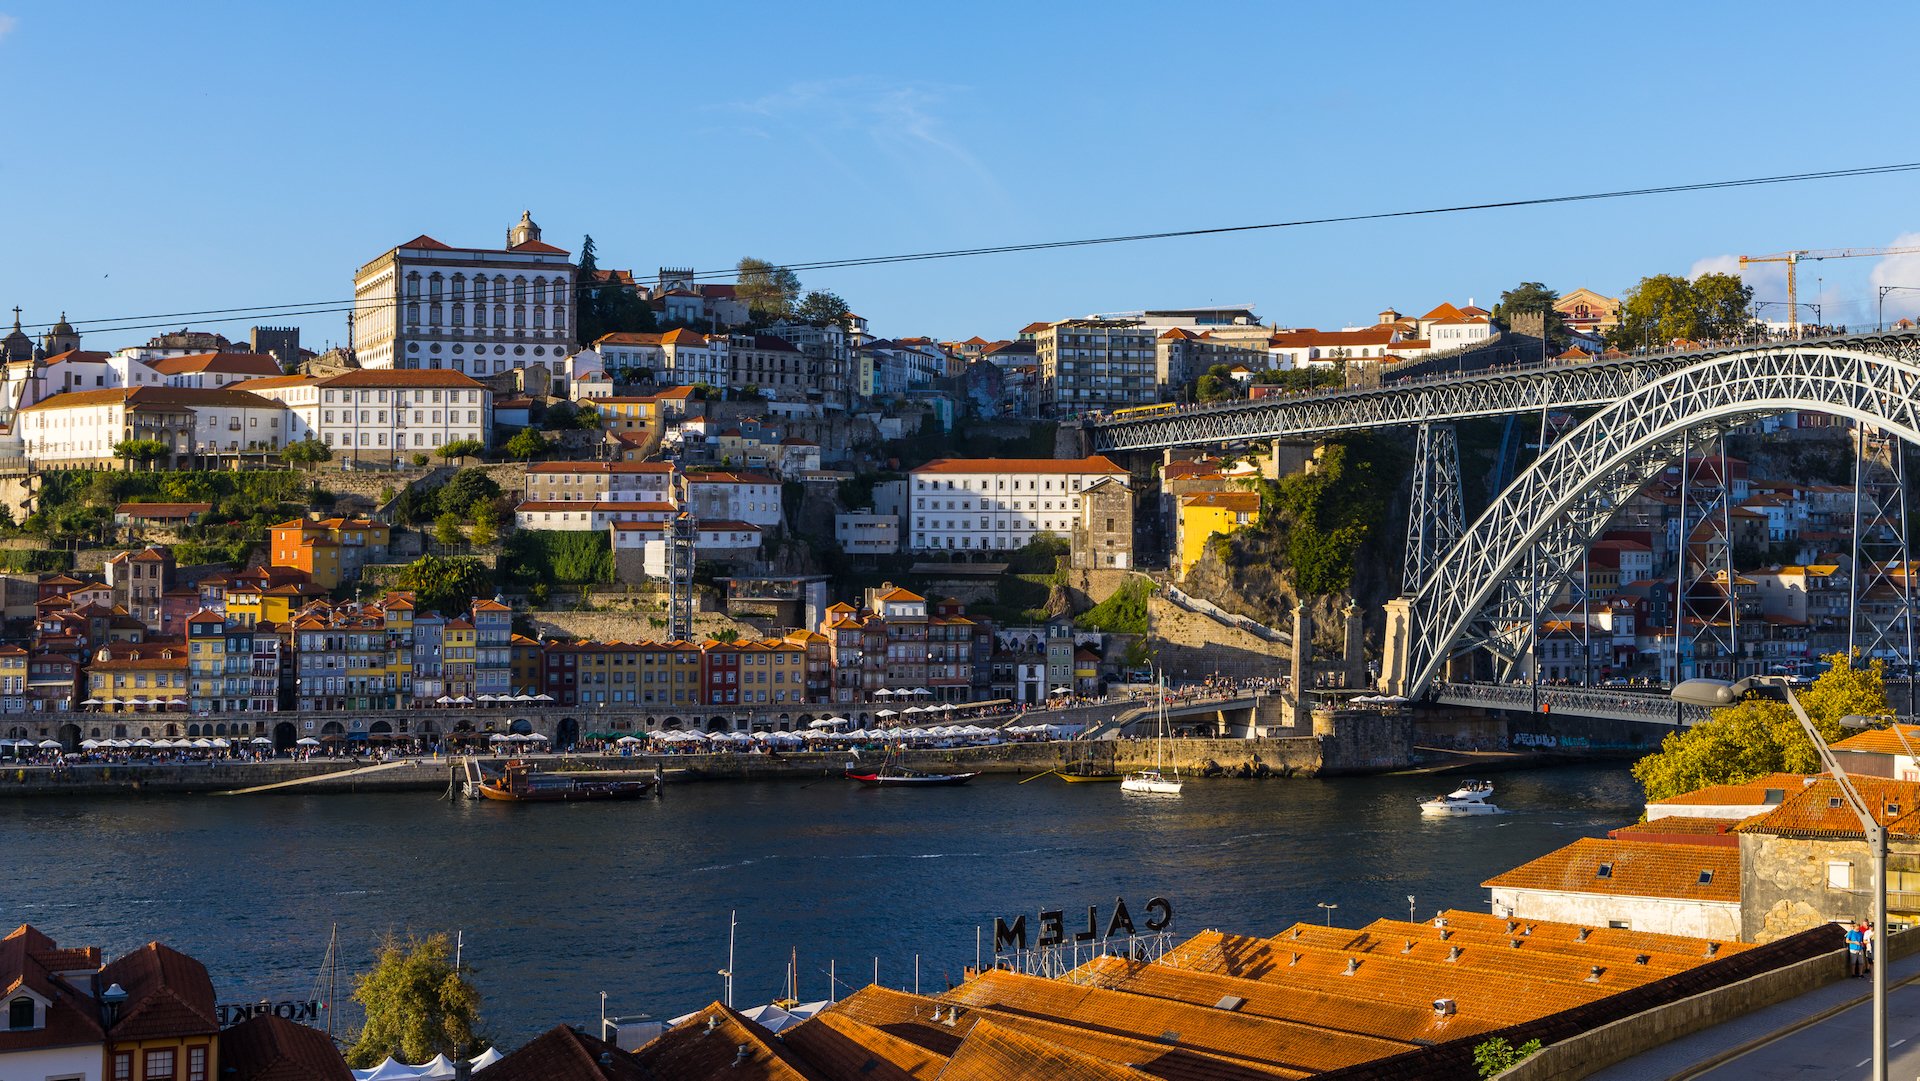  This was the view from the apartment that we had rented. It was on the Gaia side of the city, with an amazing view of the bridge and the Porto side of the river.  